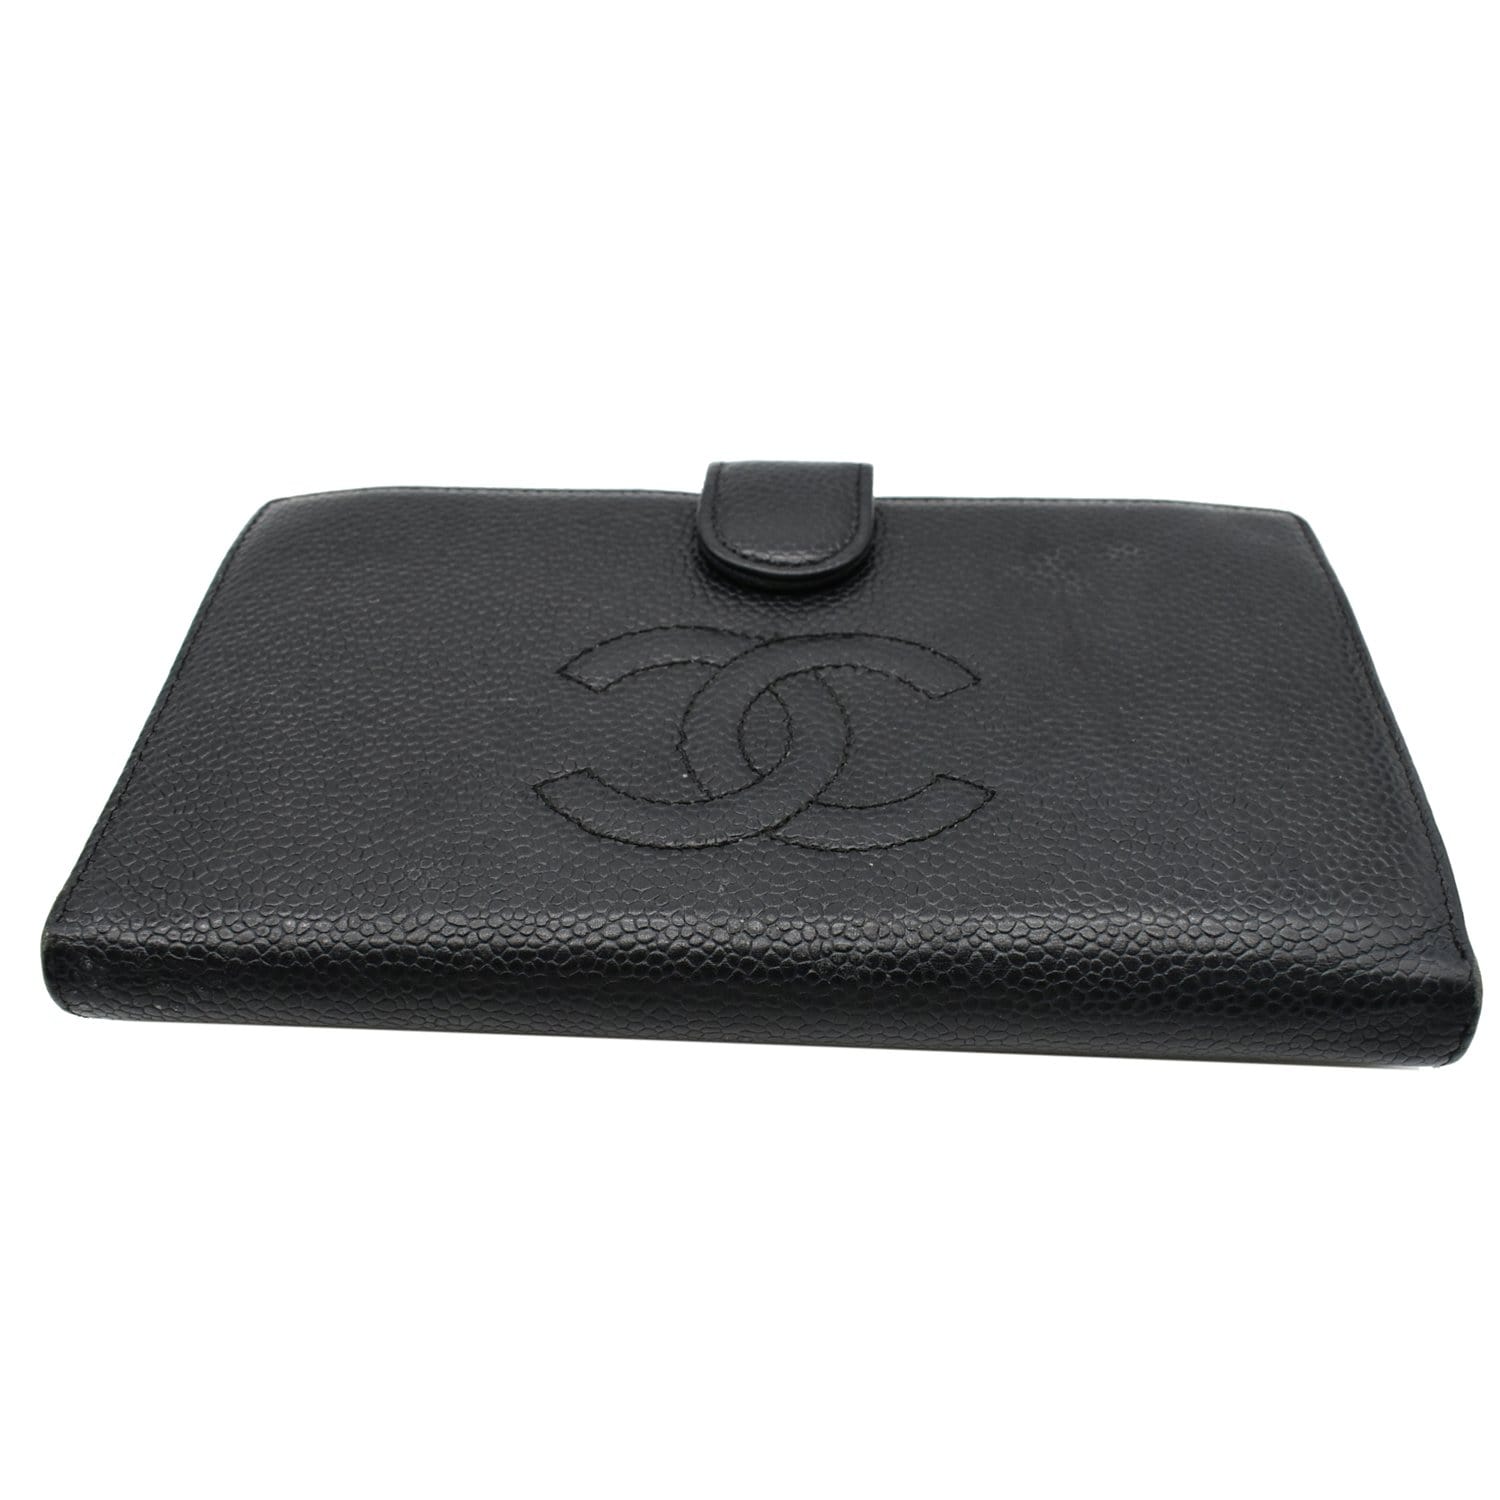 CHANEL #31356 Vintage Black Caviar Leather Snappy Wallet – ALL YOUR BLISS